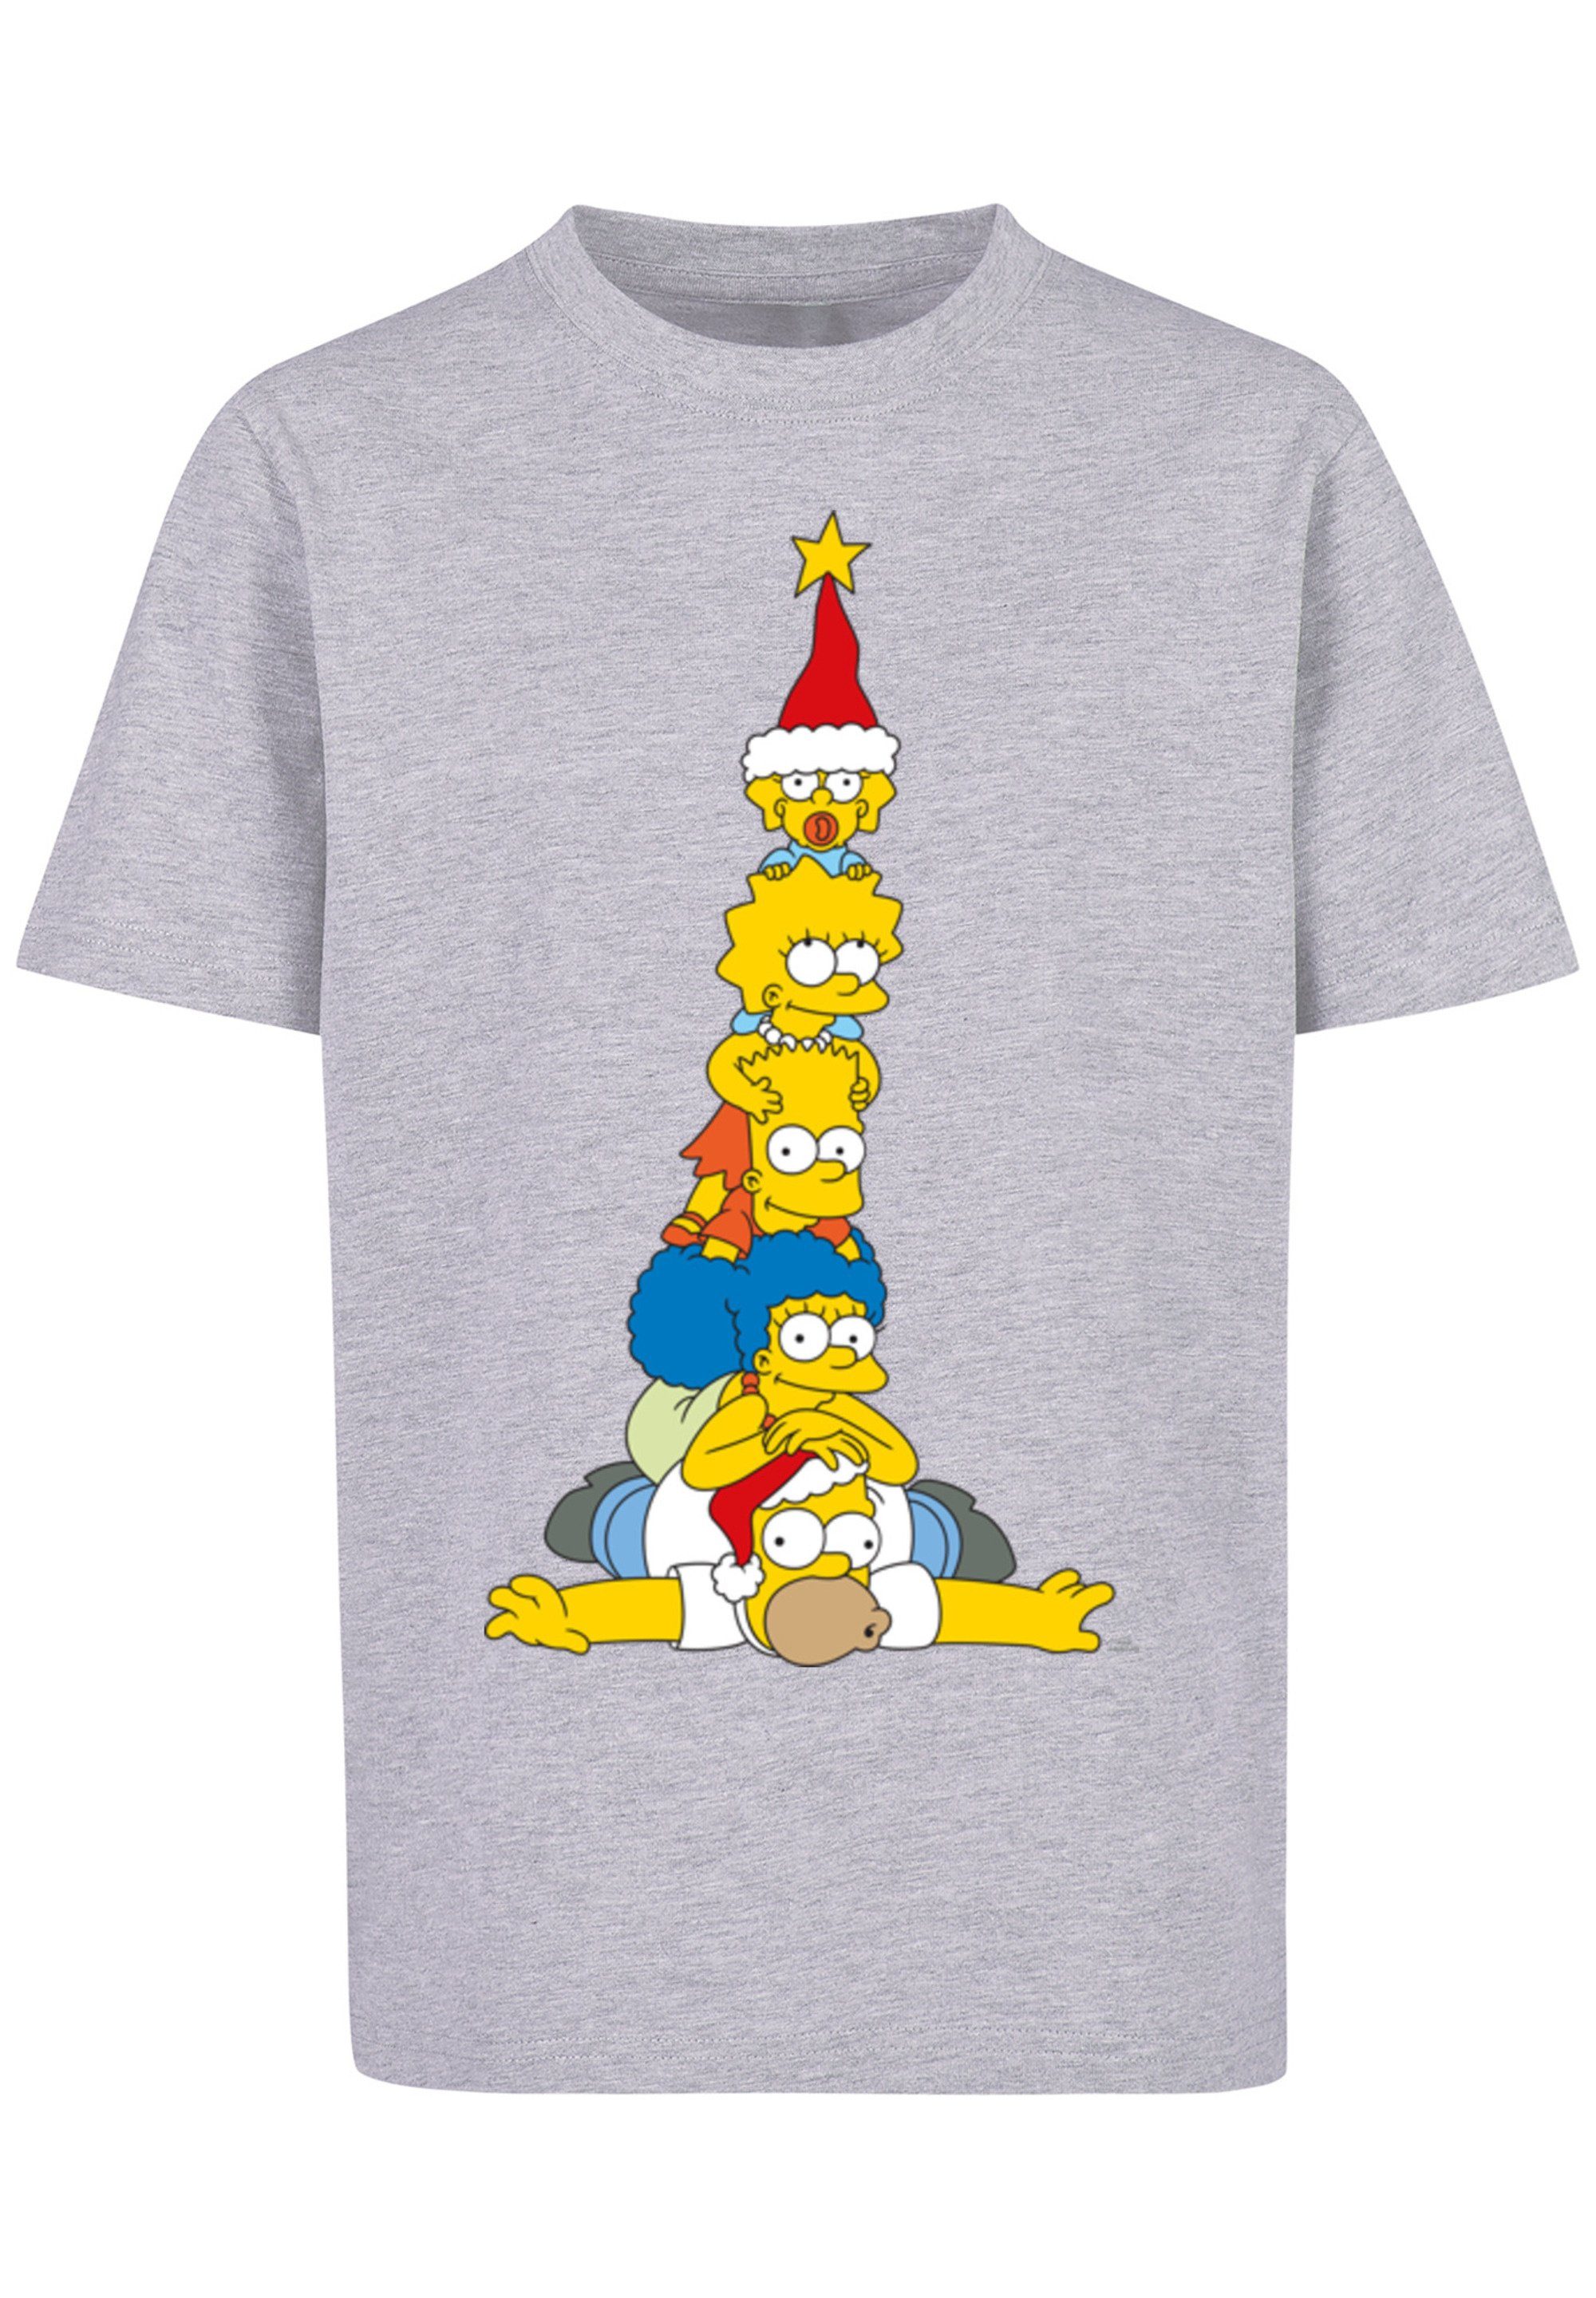 F4NT4STIC T-Shirt The heather grey Family Simpsons Weihnachtsbaum Print Christmas